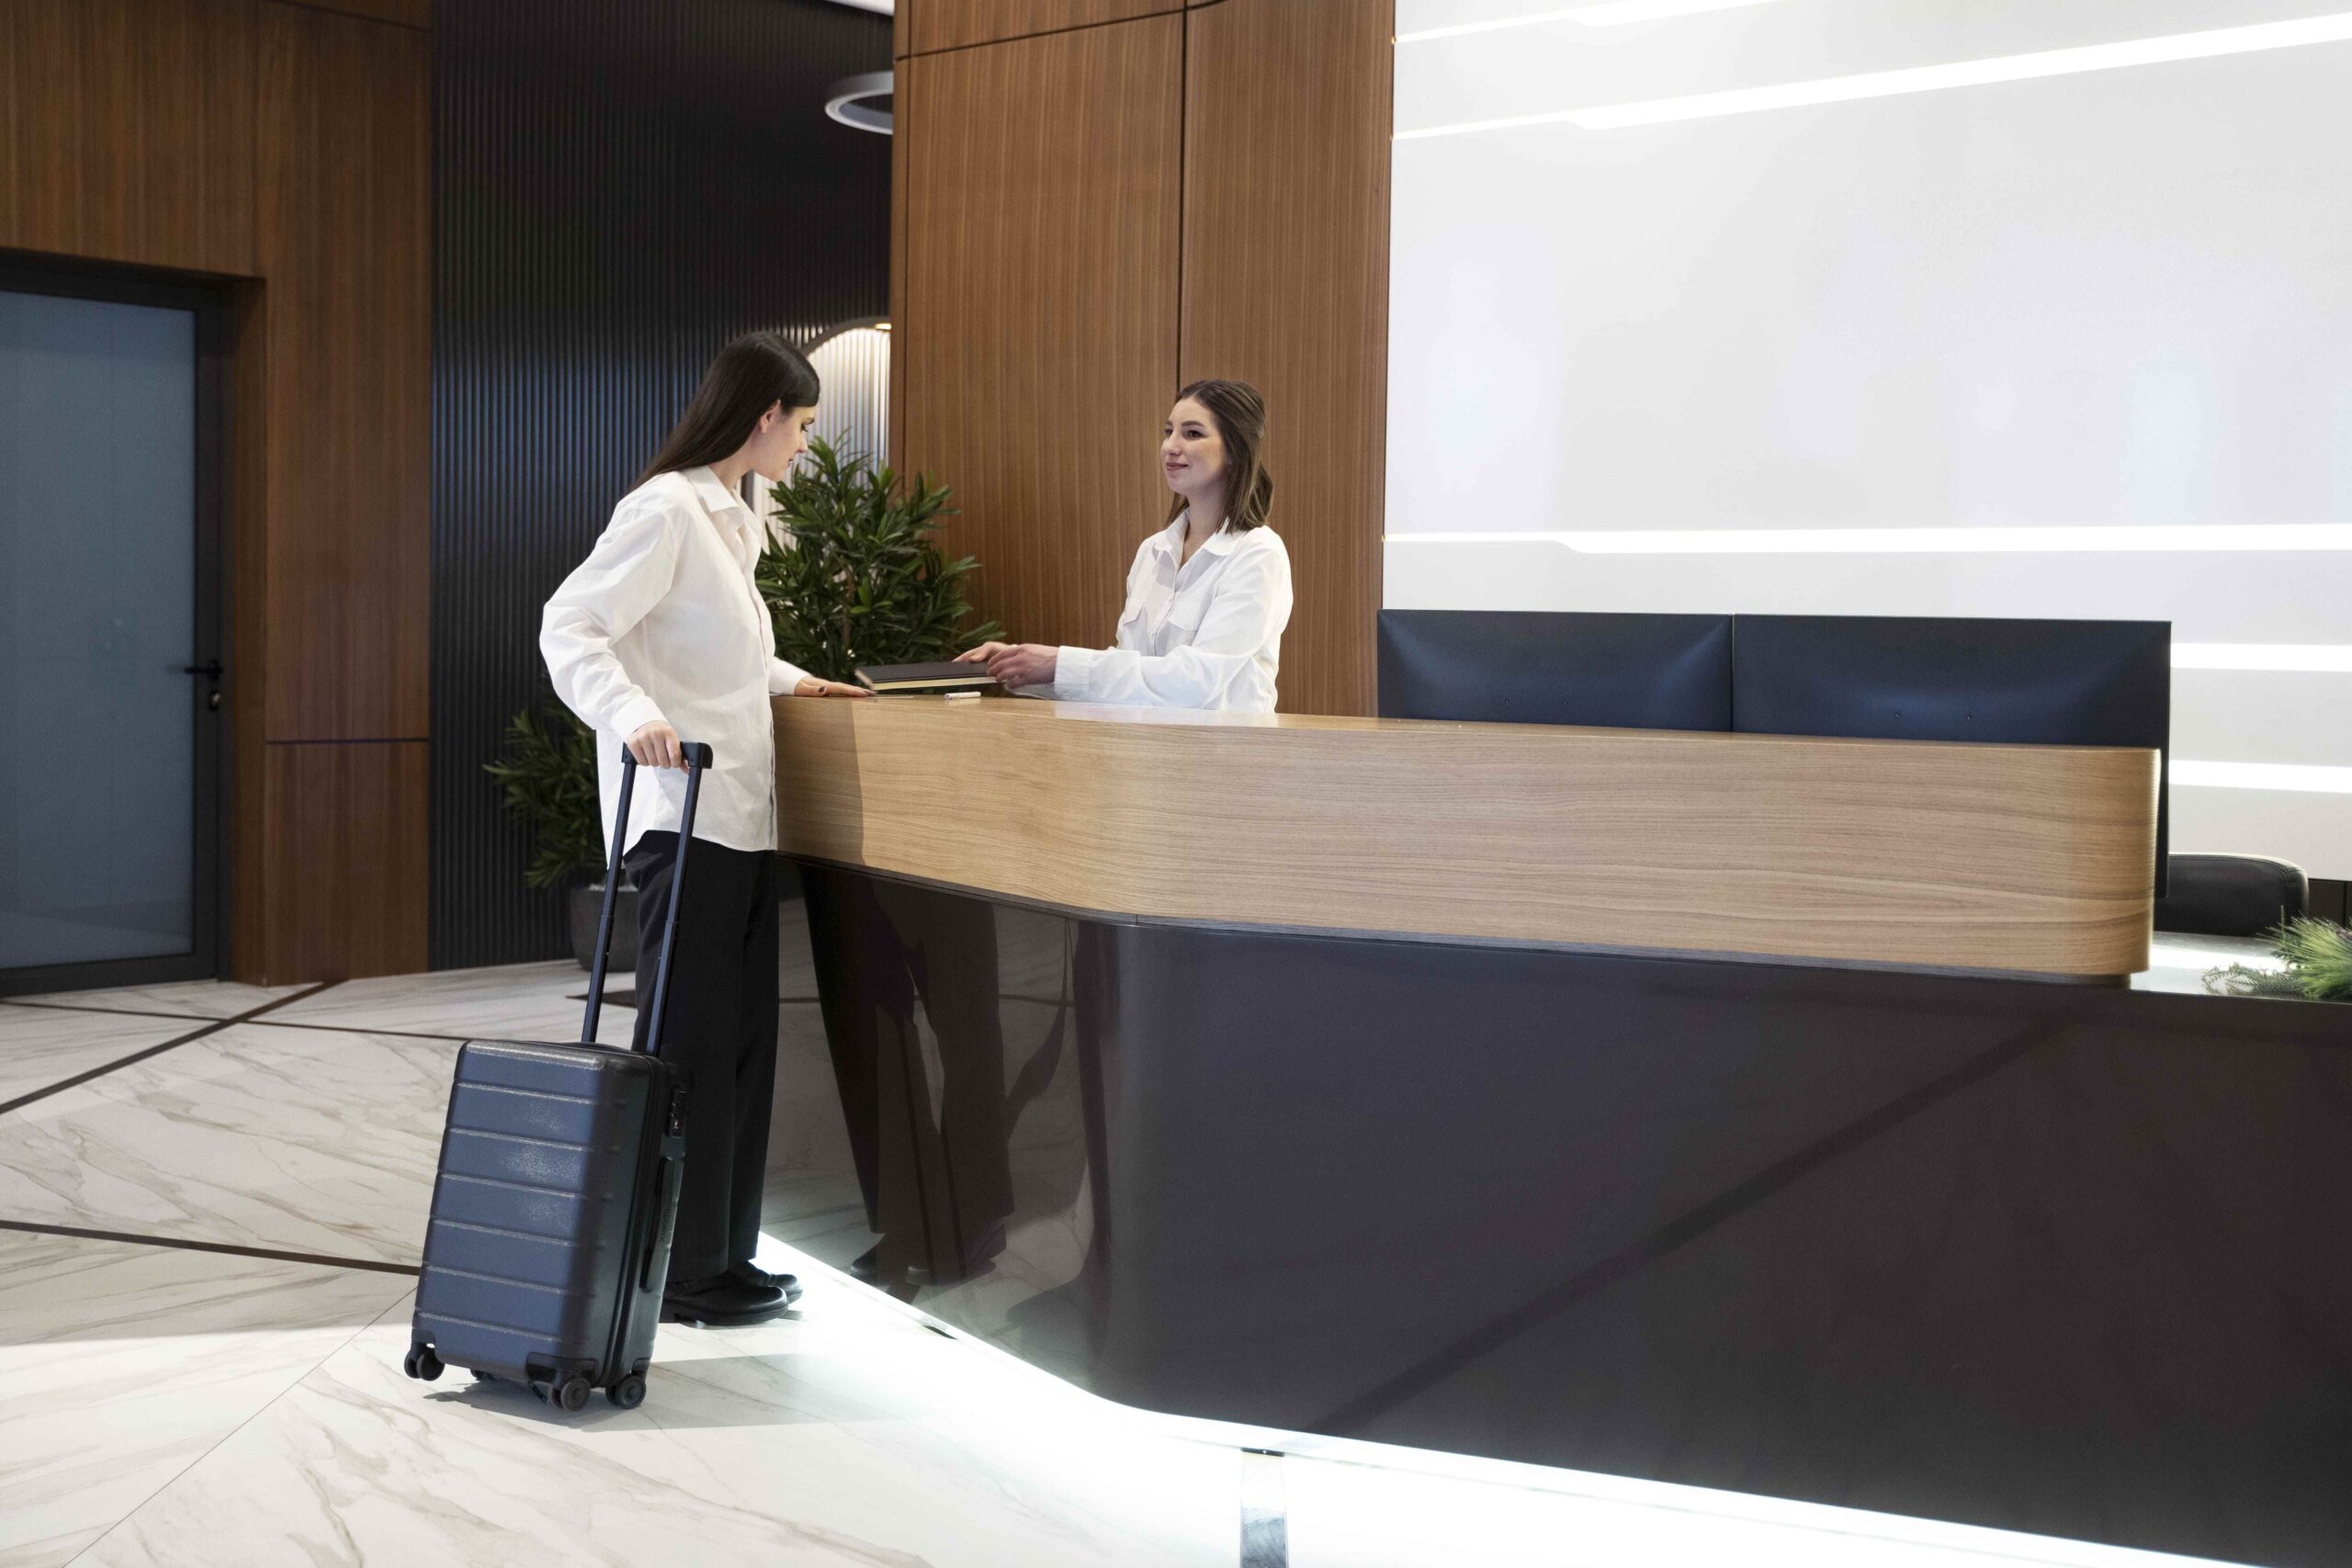 The Versatility of Concierge Security Services: From Hotel Lobbies to Event Venues